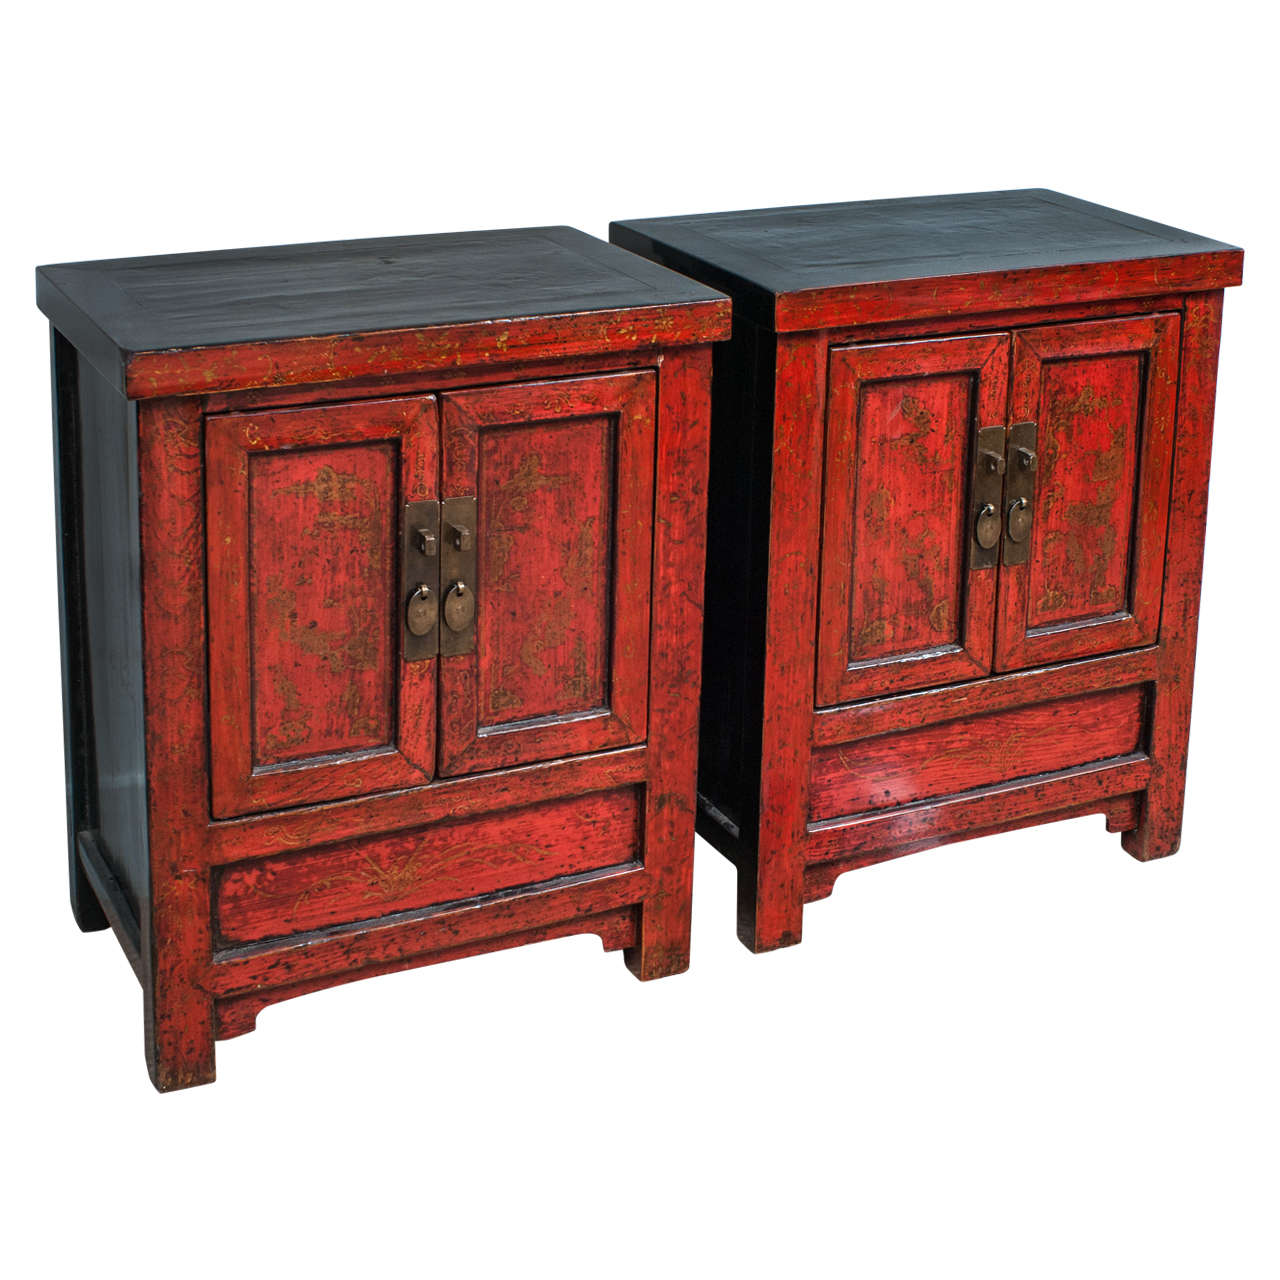 Pair of Chinese Red Lacquer Chests, 19th Century